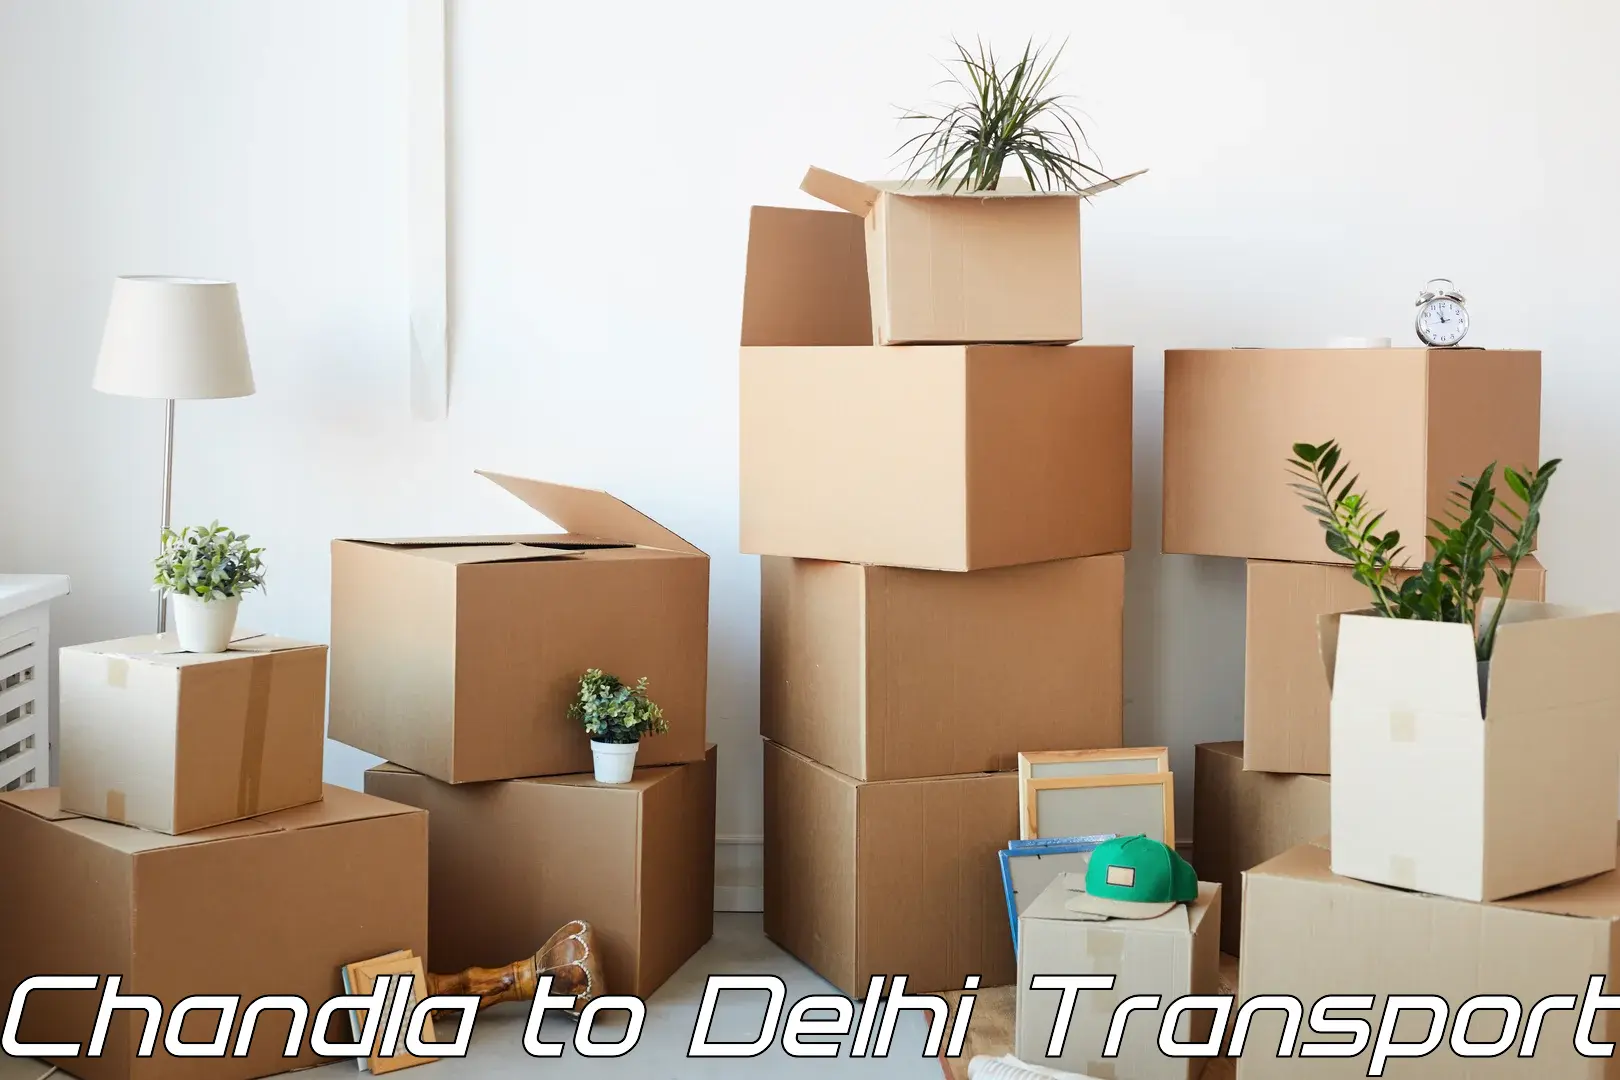 Best transport services in India Chandla to Delhi